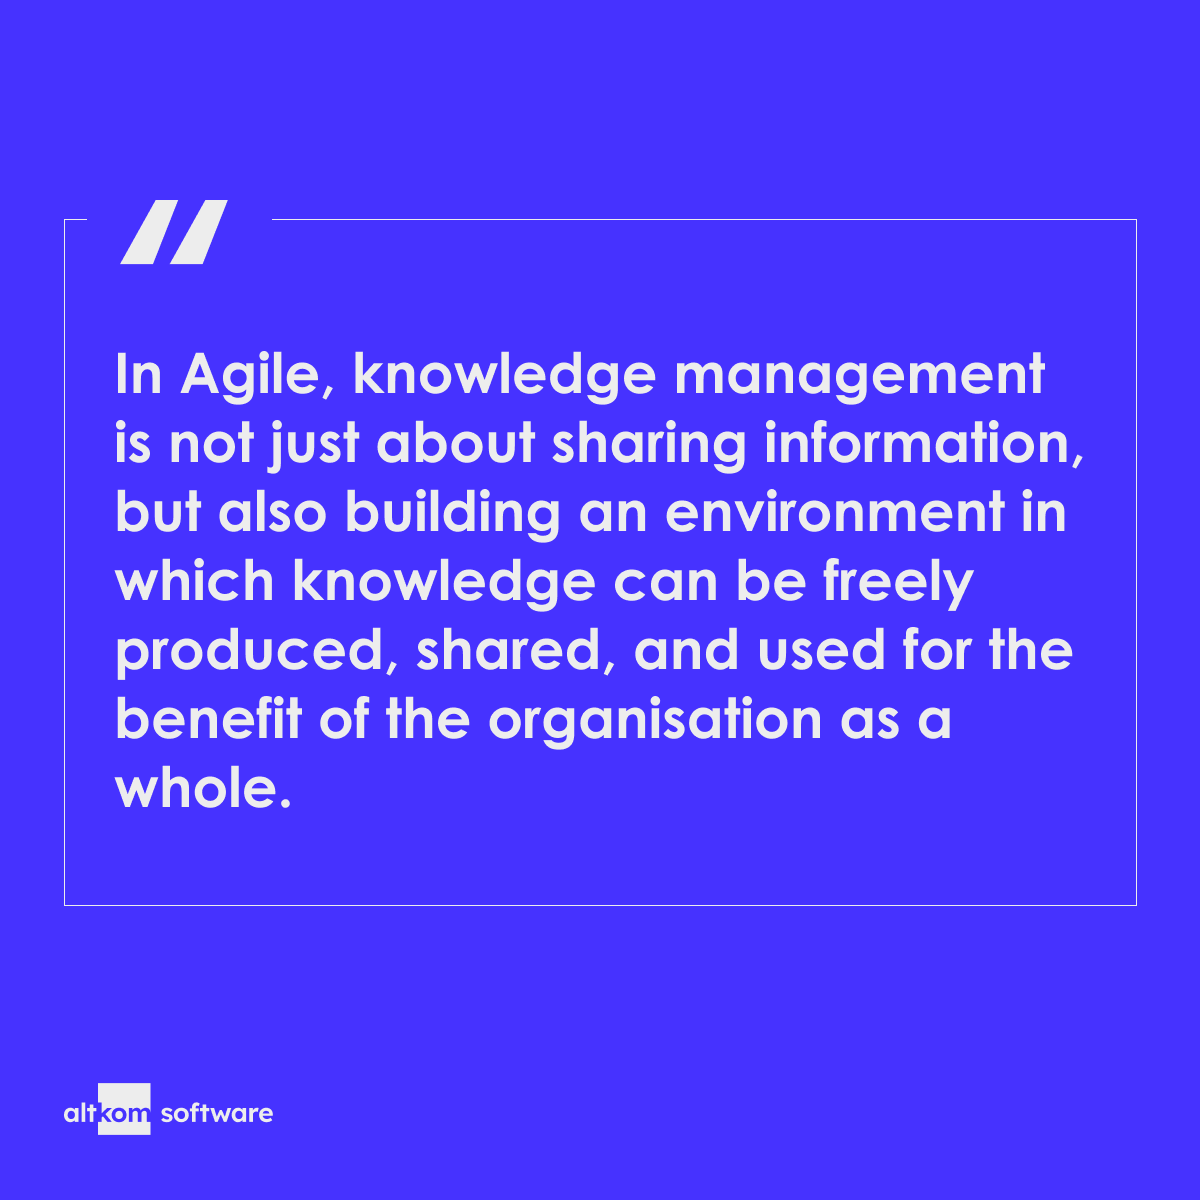 In Agile, knowledge management is not just about sharing information, but also building an environment in which knowledge can be freely produced, shared, and used for the benefit of the organisation as a whole.